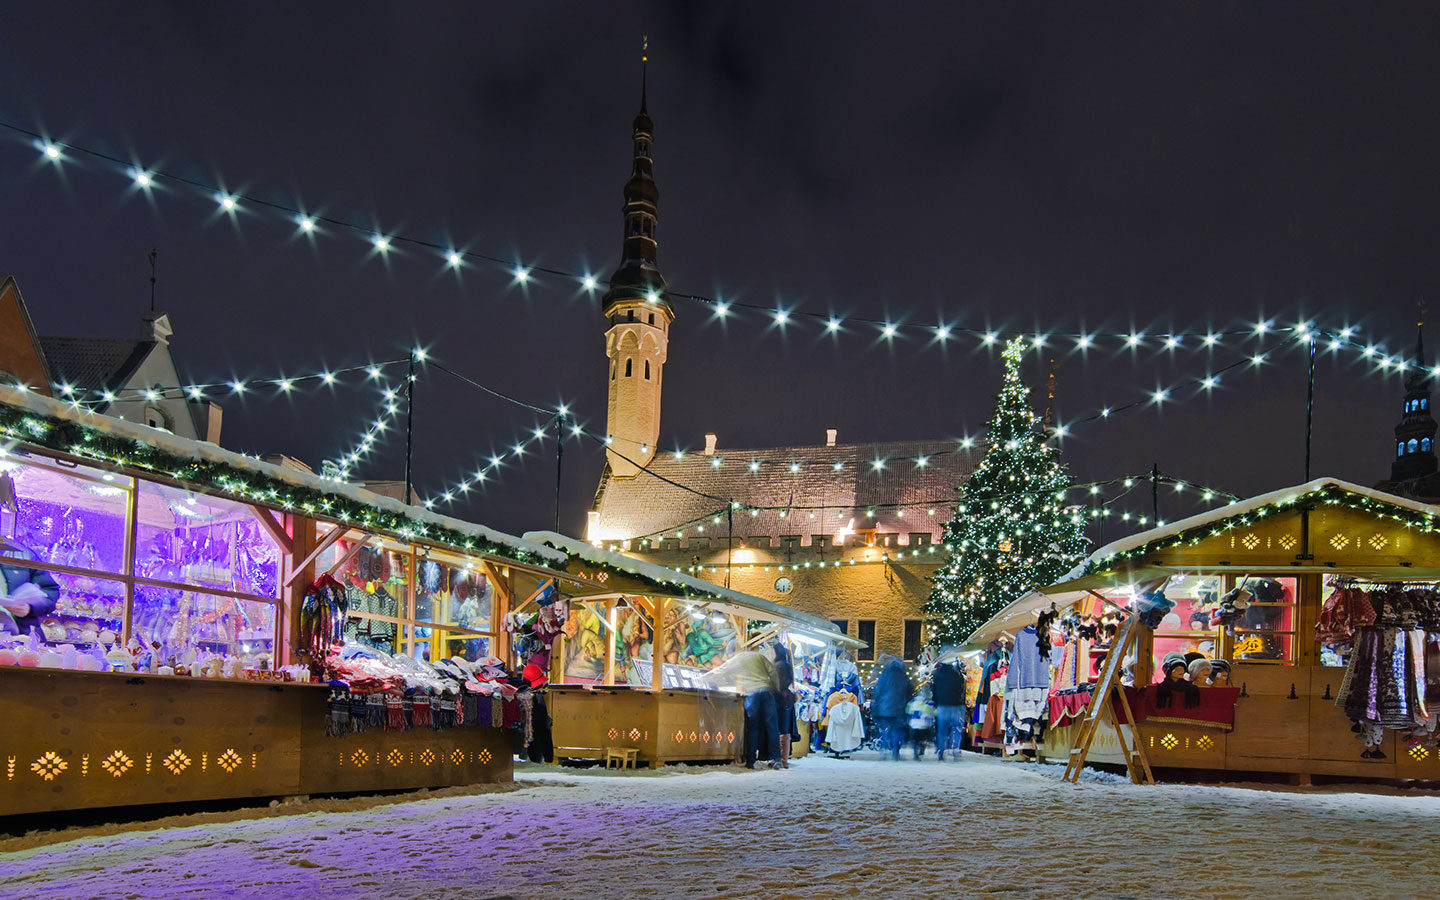 Tallinn's Christmas market in the Old Town Square